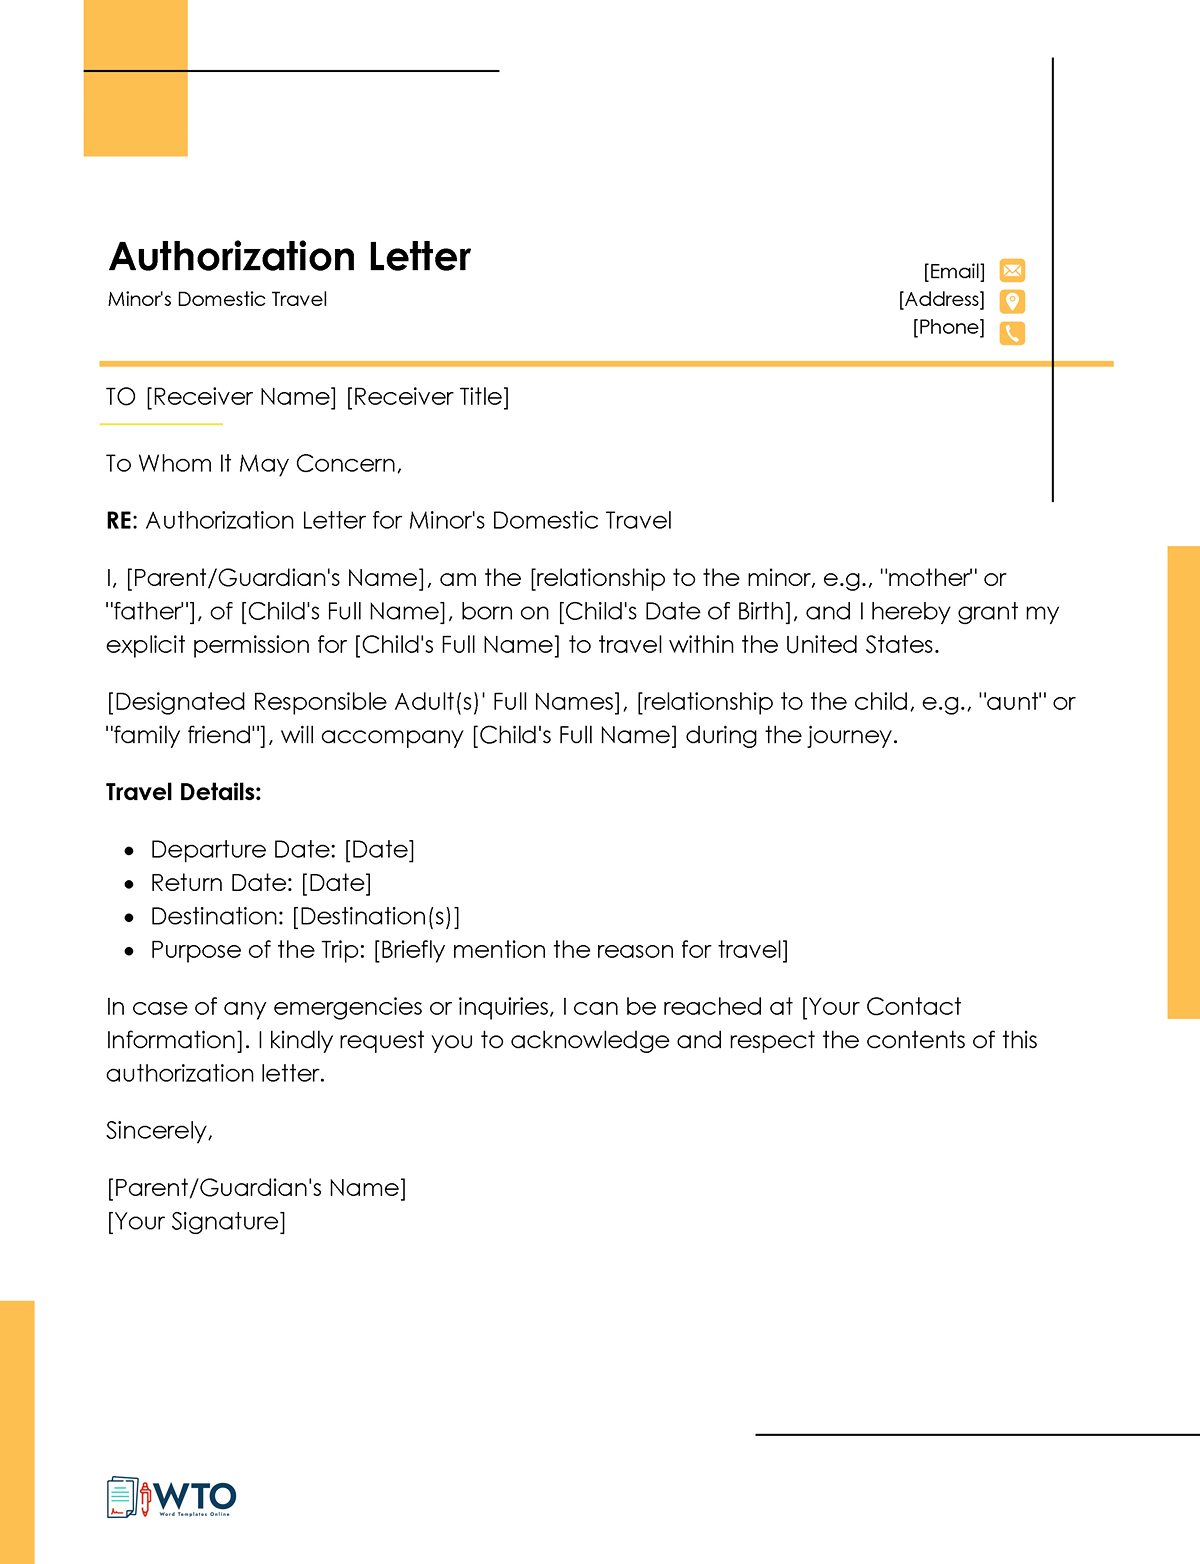 Authorization Letter toTravel with Minor Template-Free Download